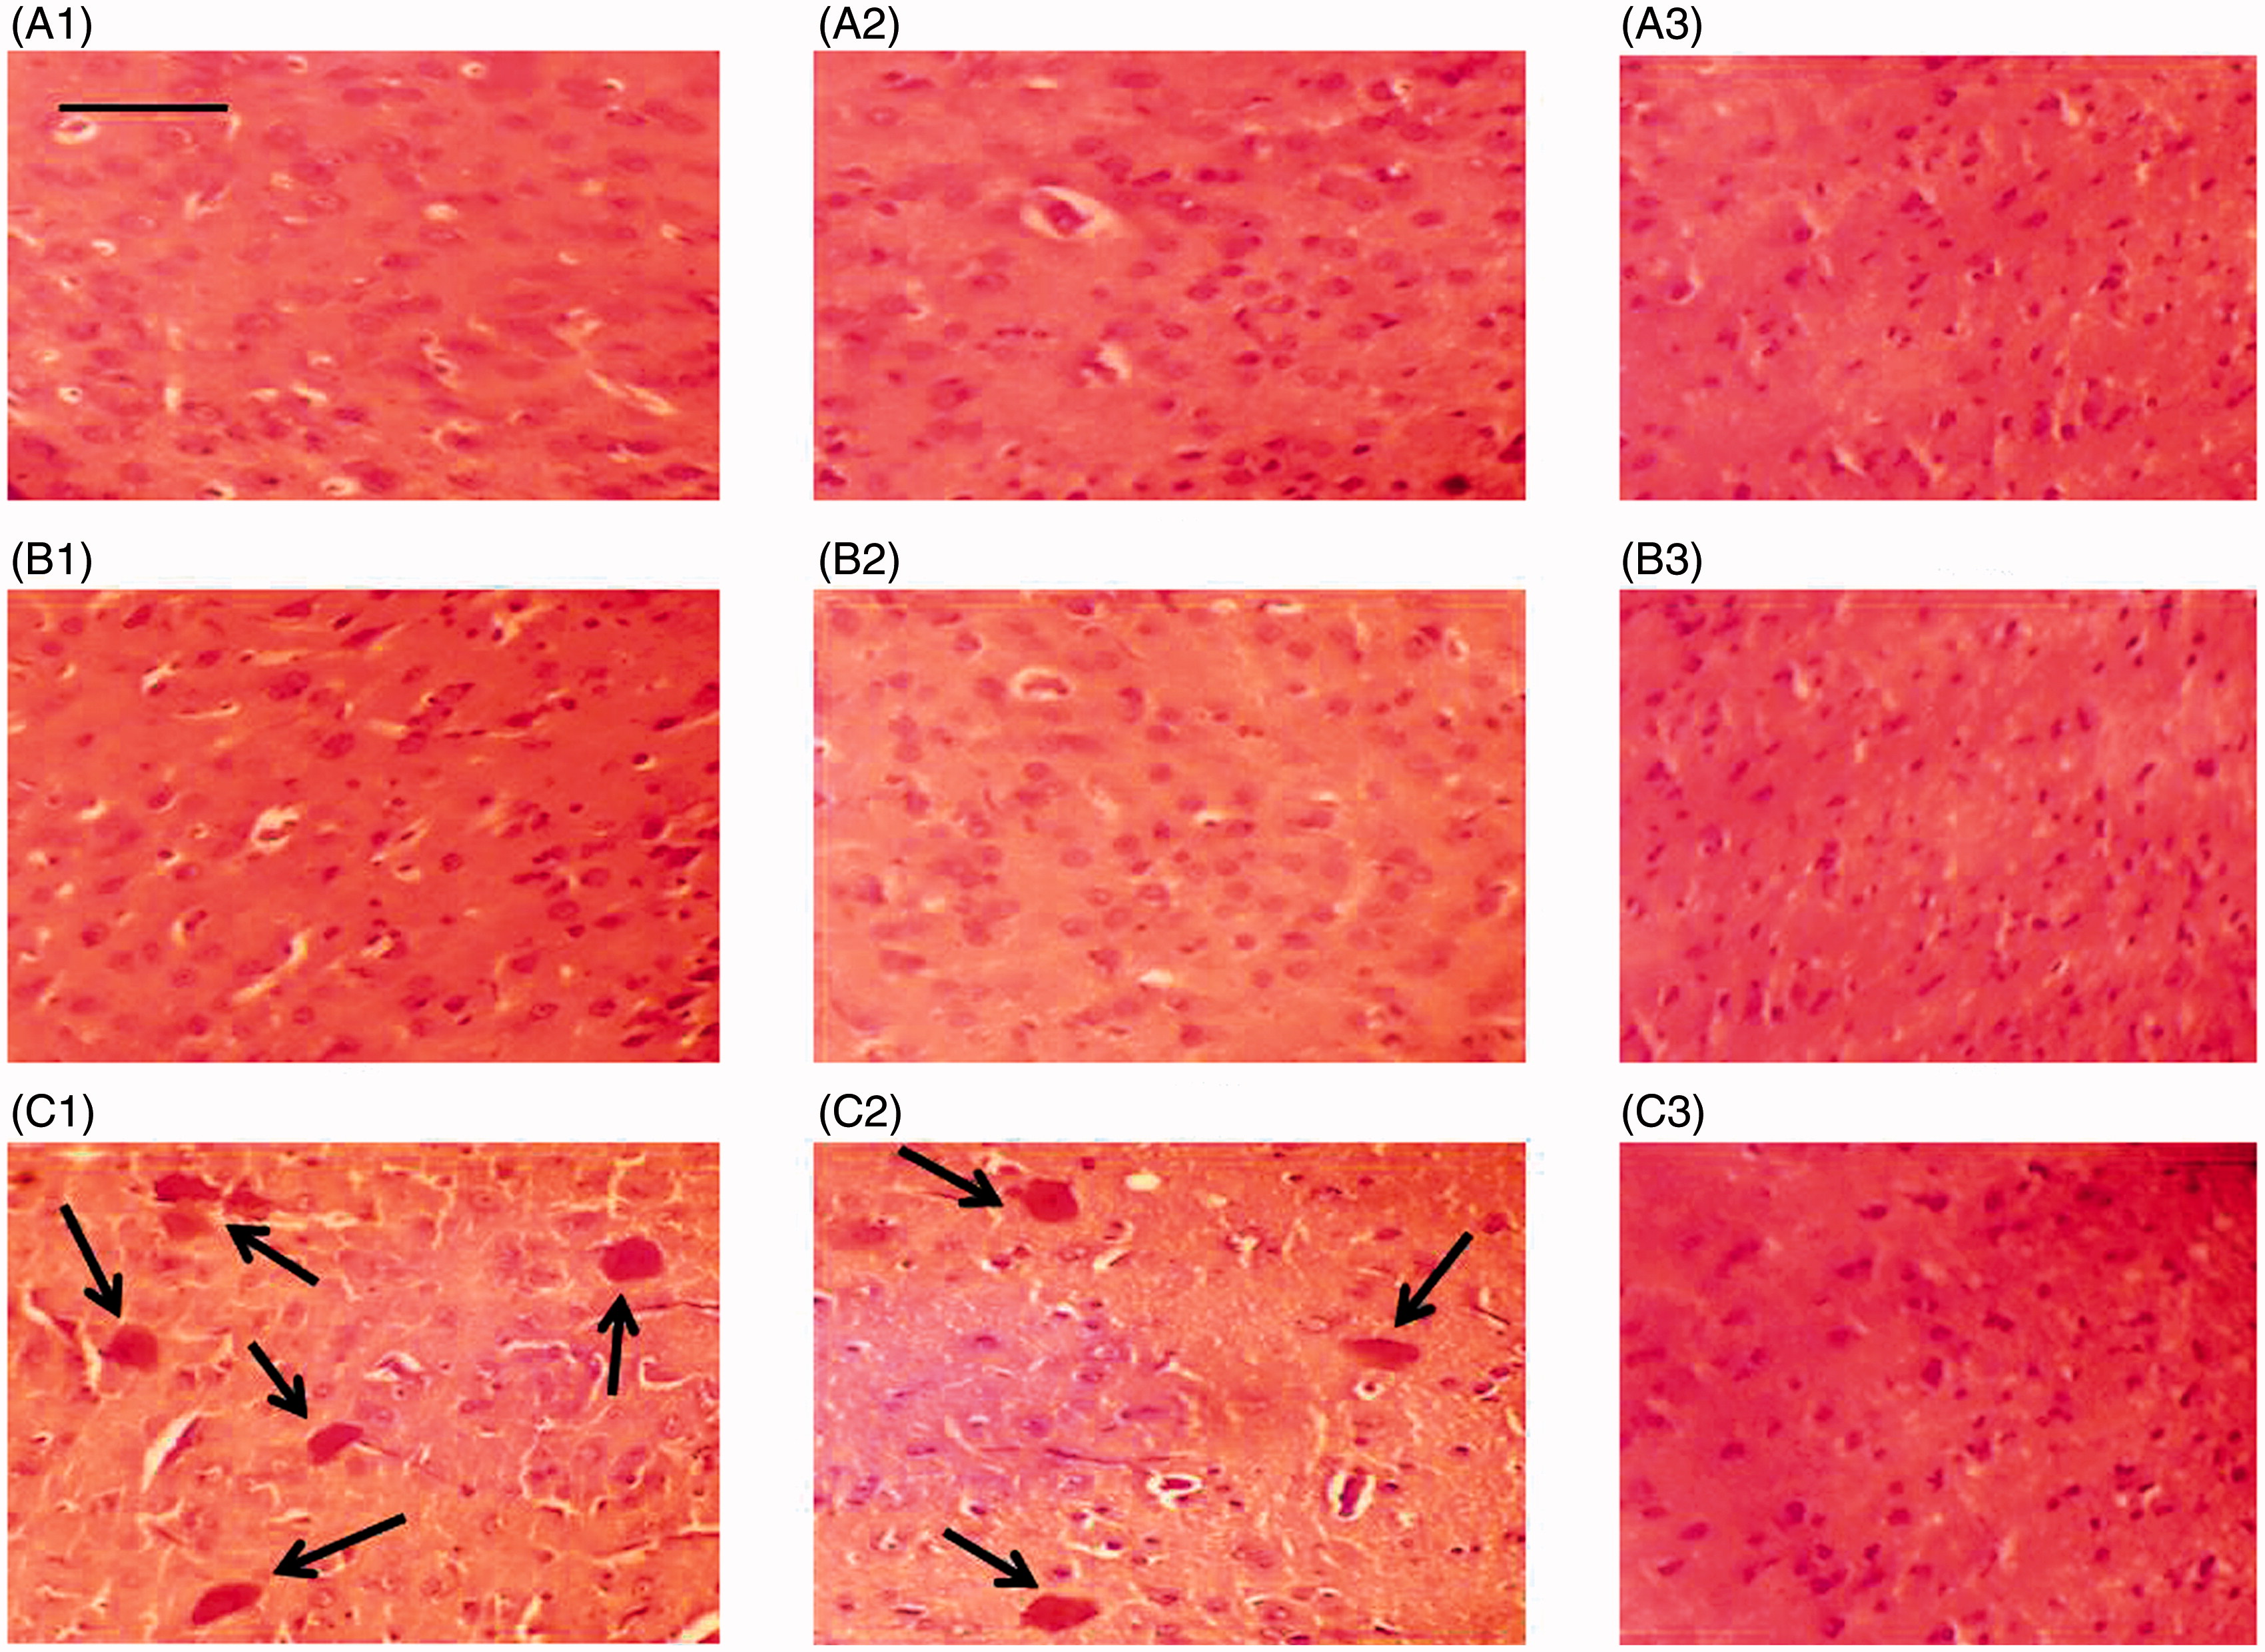 Figure 4. Staining (Congo red) of plaques in different brain areas in rats. Representative micrographs are shown. Control rats: (A) (top row); sham-operated rats: (B) (middle row); icv colchicine injected rats: (C) (last row). Frontal cortex: 1 (left column), parietal cortex: 2 (middle column), occipital cortex: 3 (right column). Letter and number indicate group and specific brain region (e.g, A1: Frontal cortex, control rat). Magnification: 400×, length of bar = 16.18 μm. Arrows indicate plaques.